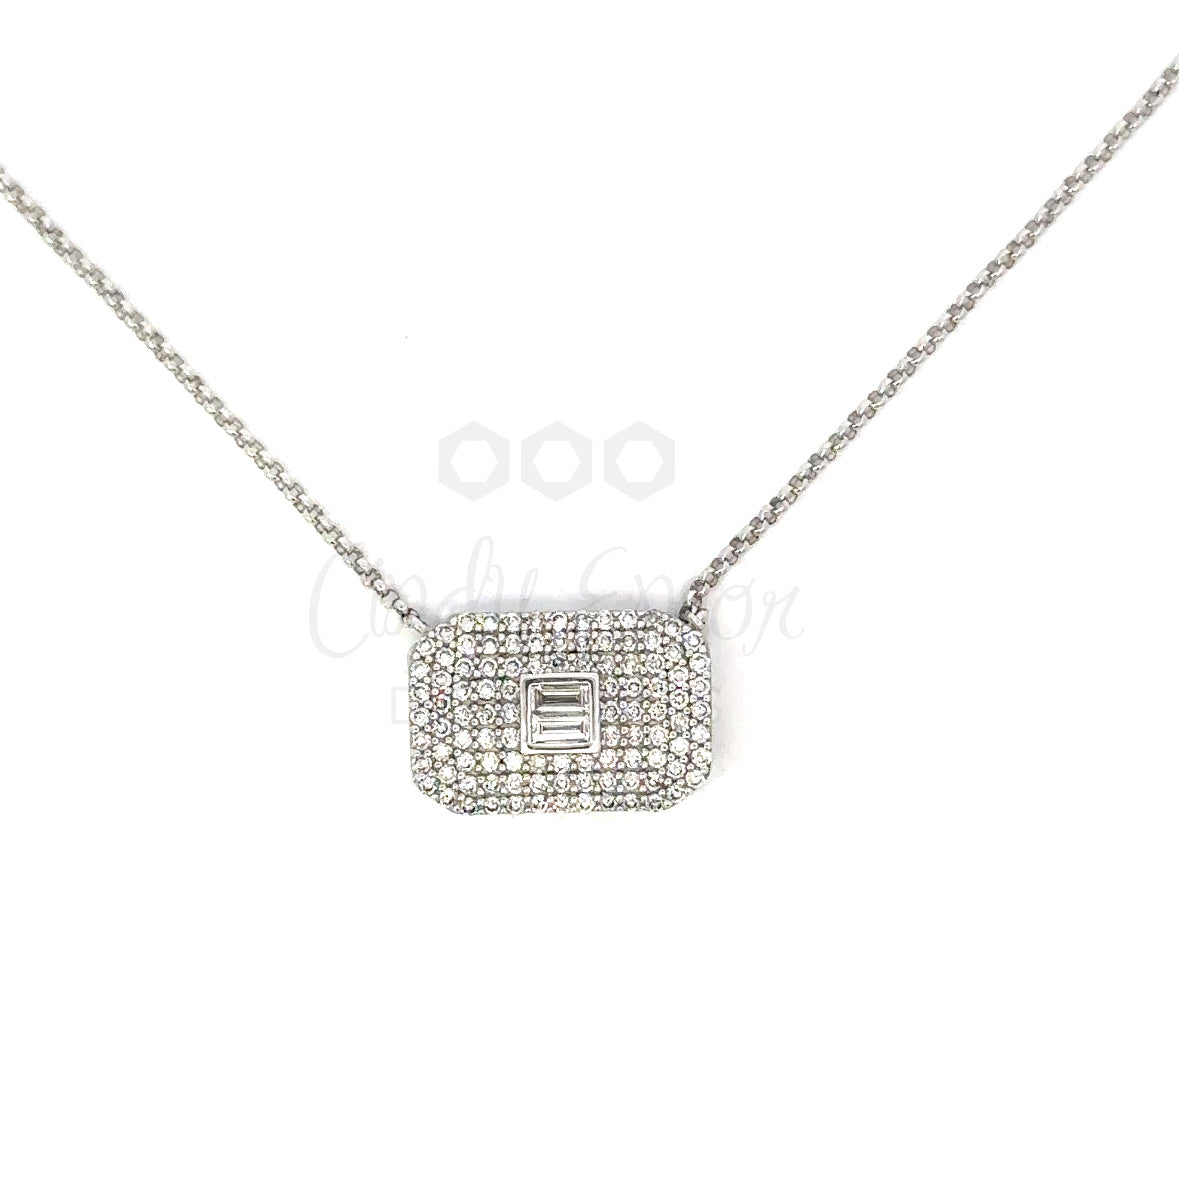 Pave Rectangle Shaped Necklace with Emerald Cut Diamond